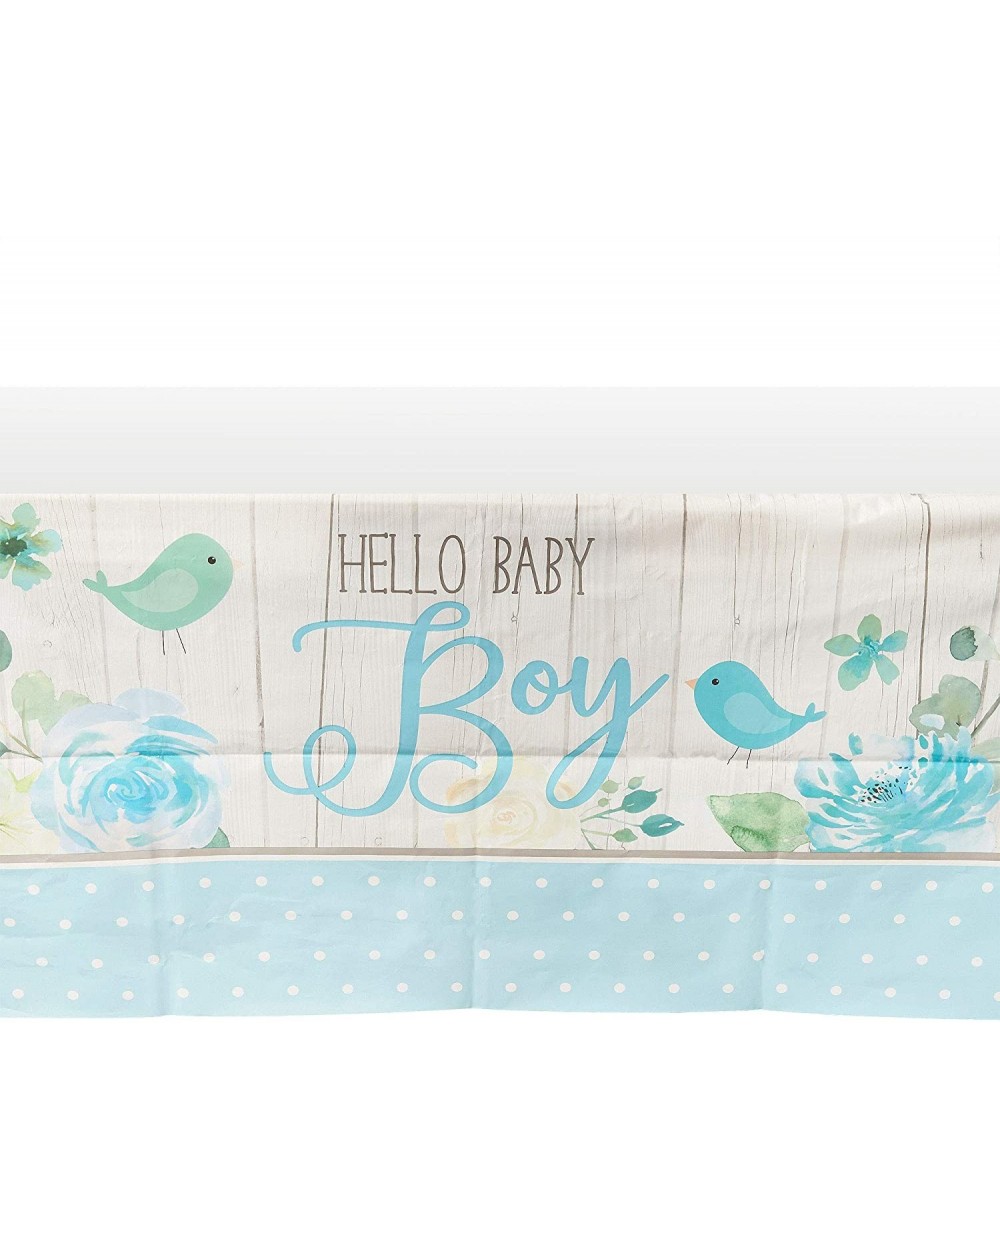 Tablecovers Boy Baby Shower Table Covers (54 x 108 in.- Blue- Pack of 3) - CO18U9ZELNR $8.58